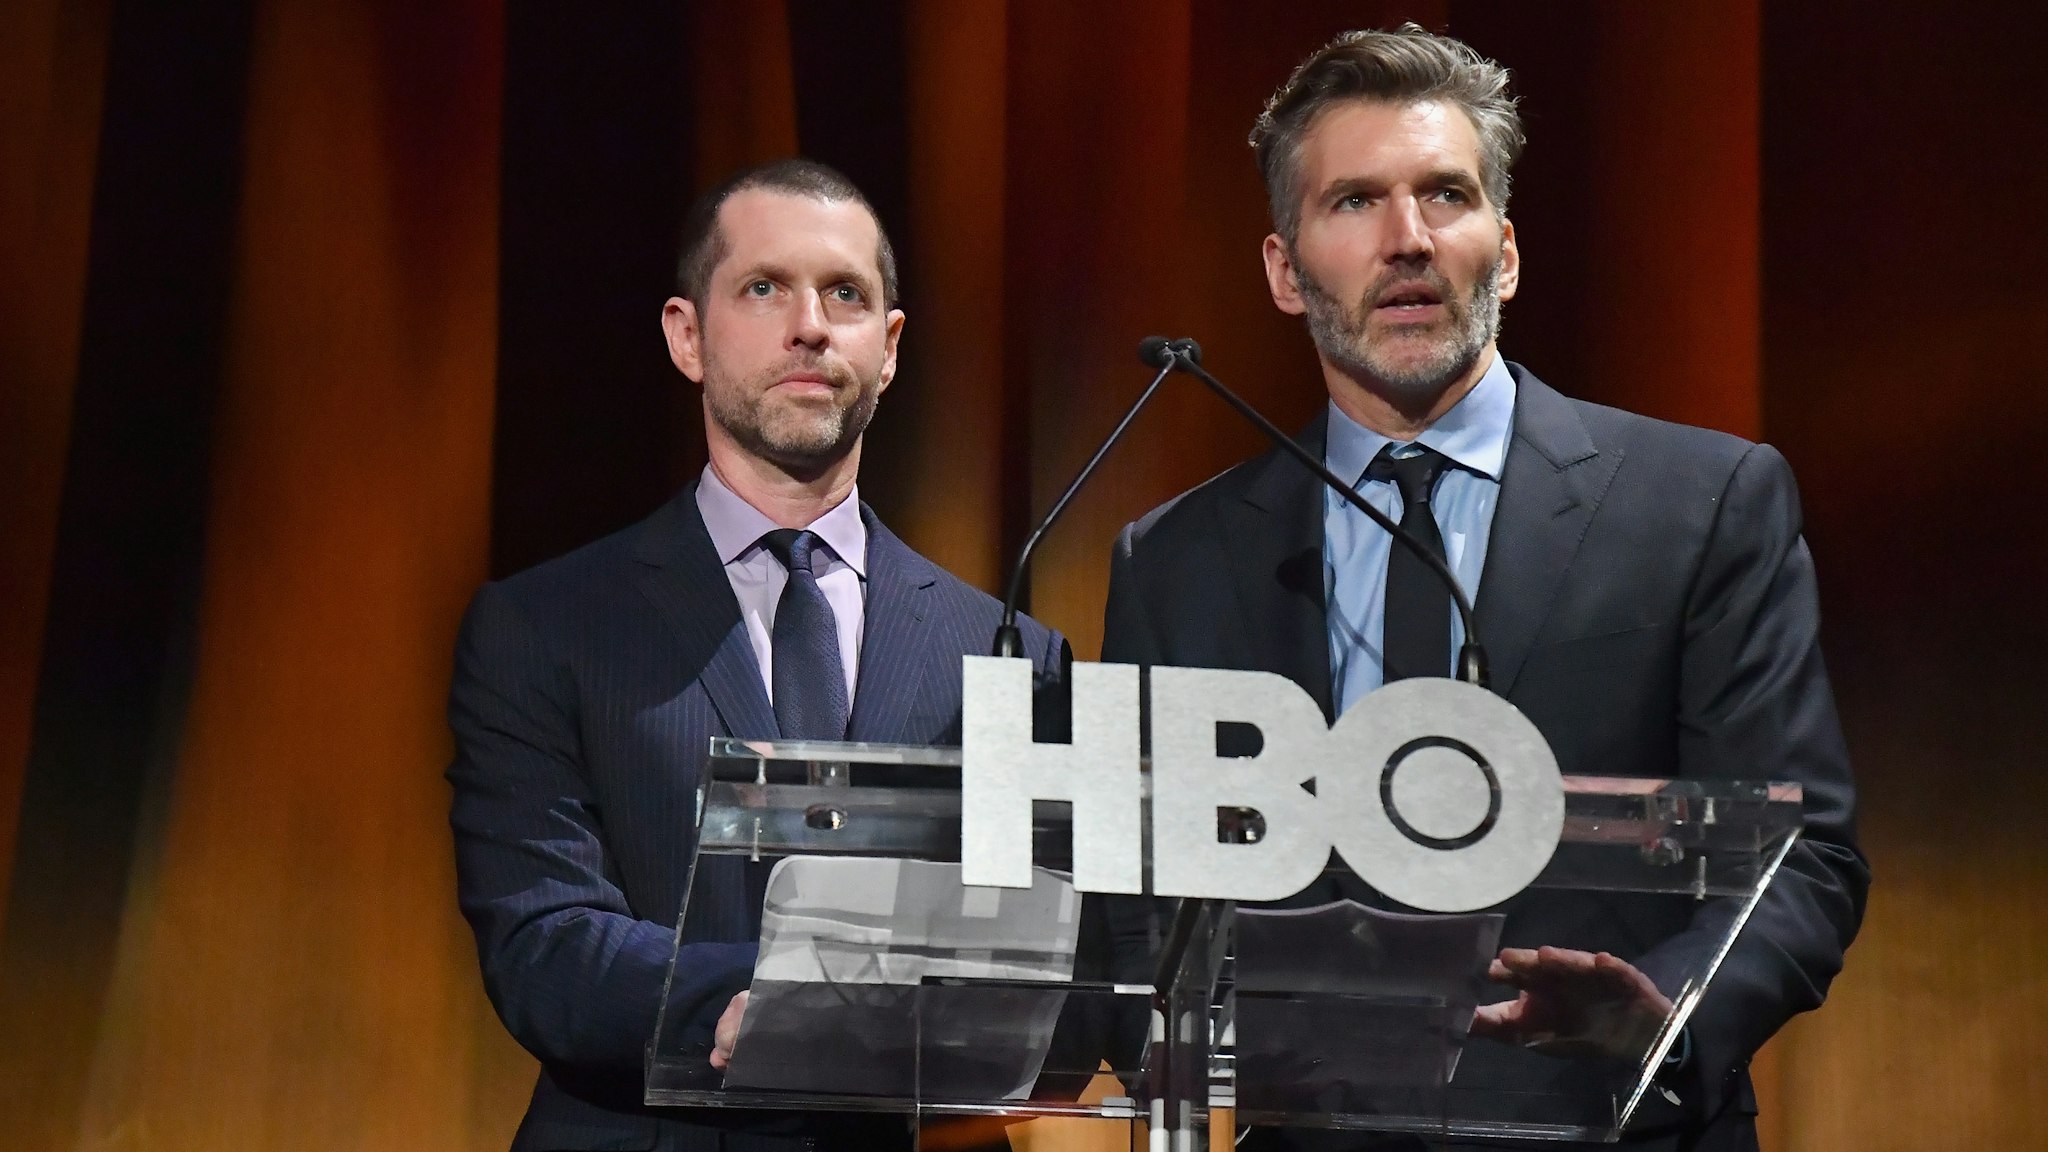 NEW YORK, NY - APRIL 03: Executive Creators and Producers of "Game of Thrones", D.B Weiss and David Benioff speak onstage during the "Game Of Thrones" Season 8 NY Premiere on April 3, 2019 in New York City. (Photo by Jeff Kravitz/FilmMagic for HBO)